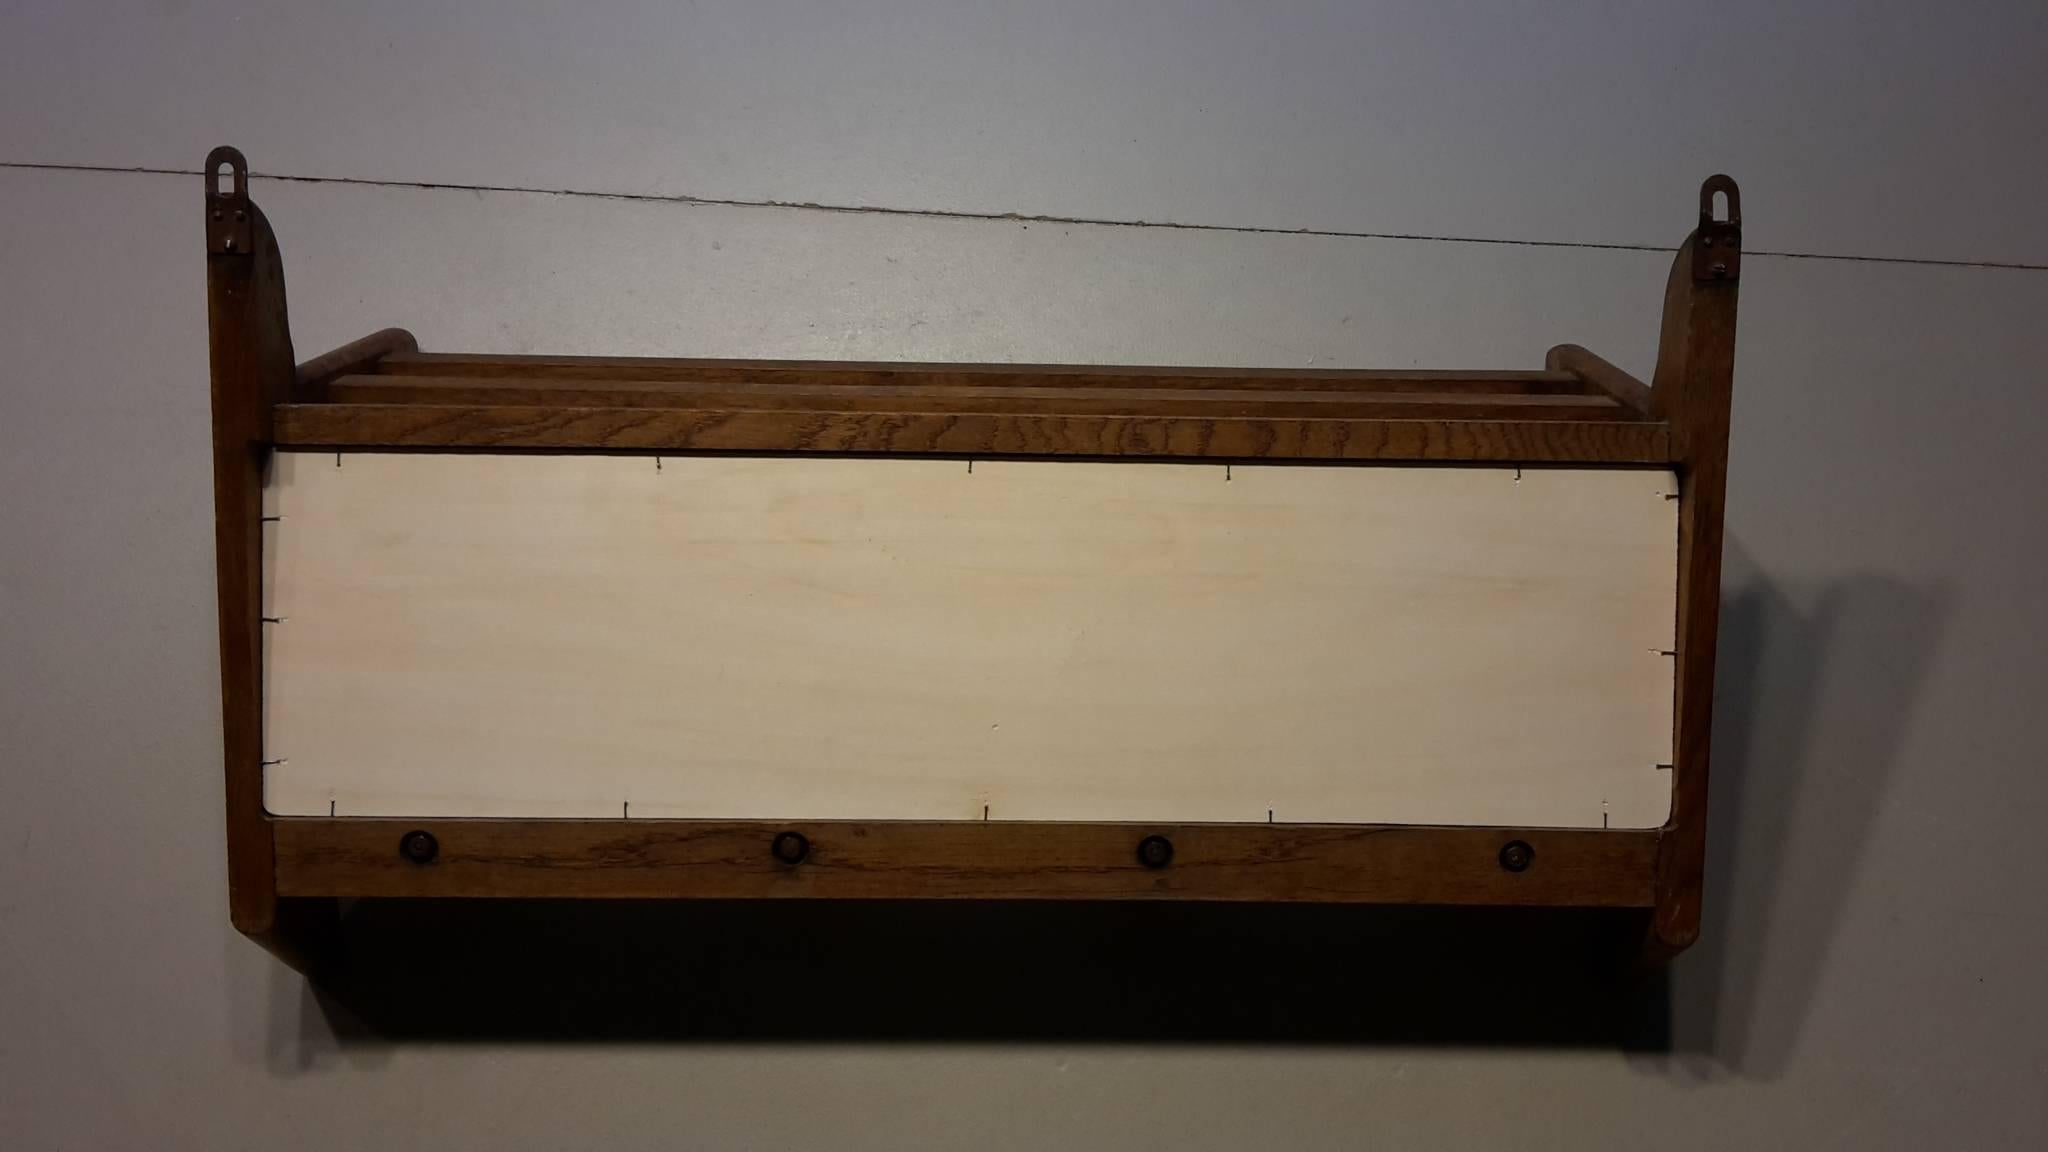 20th Century French Wall Coat Rack Made of Oak by Guillerme and Chambron, 1960s For Sale 1